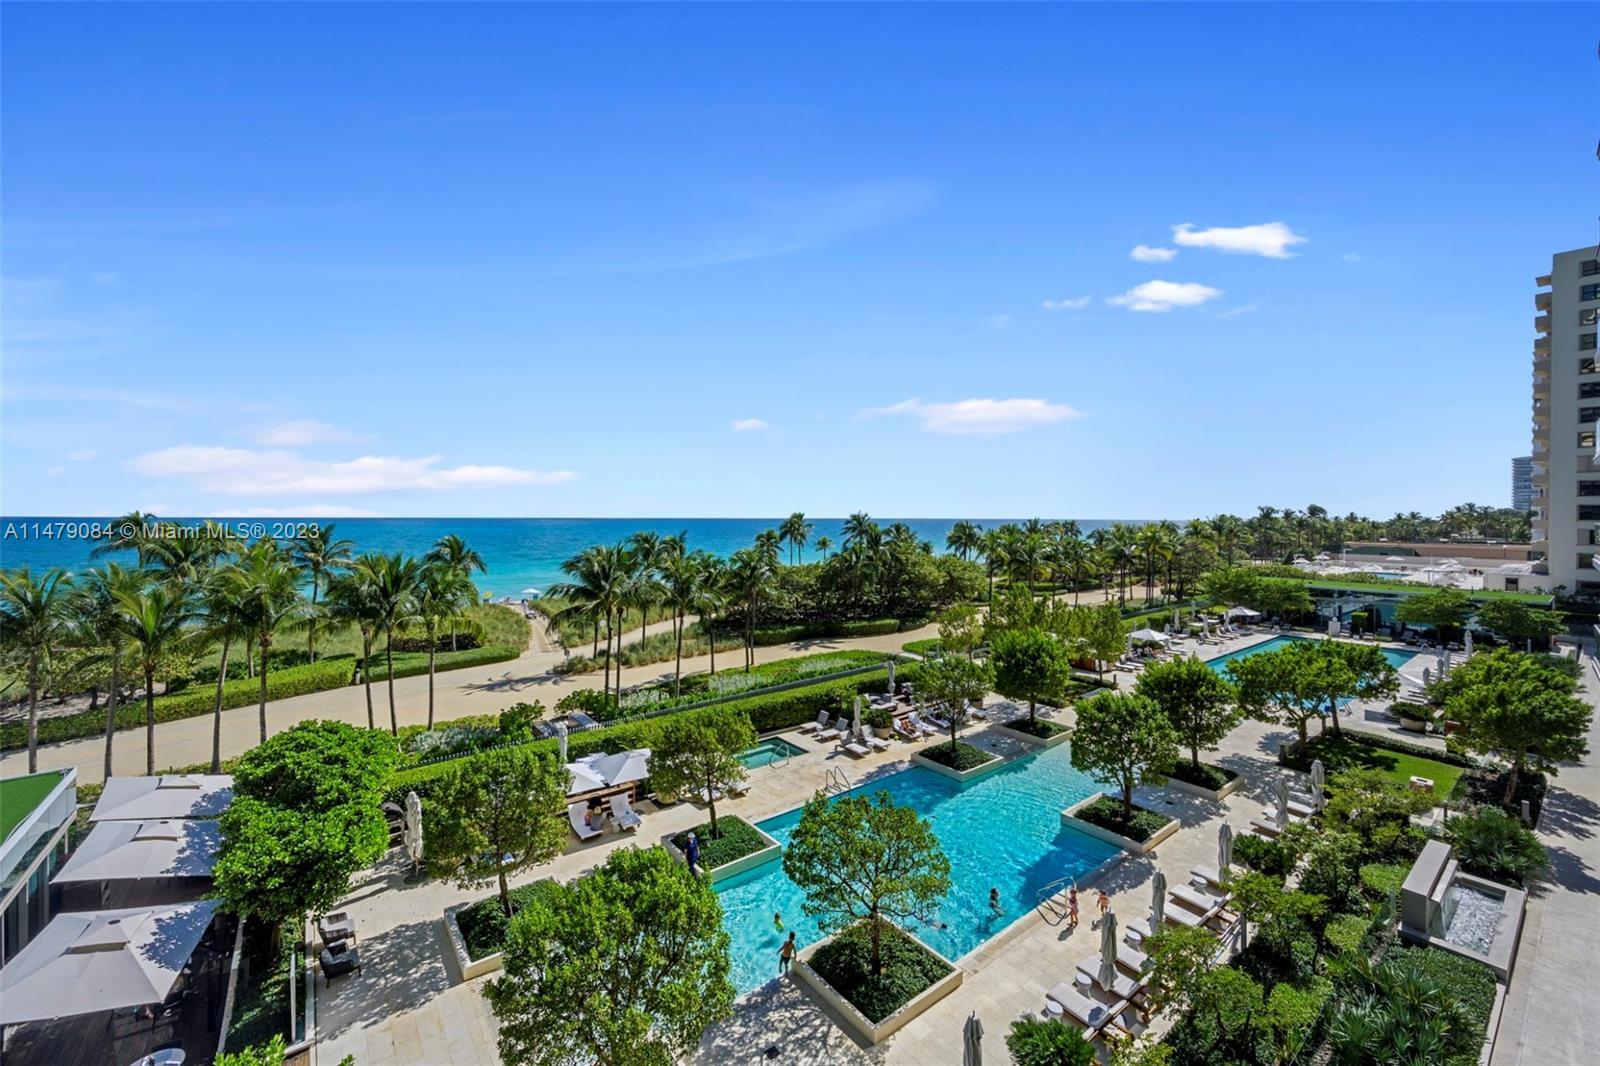 Exquisite turnkey corner residence in the prestigious Oceana Bal Harbour. This exceptional 2-bedroom